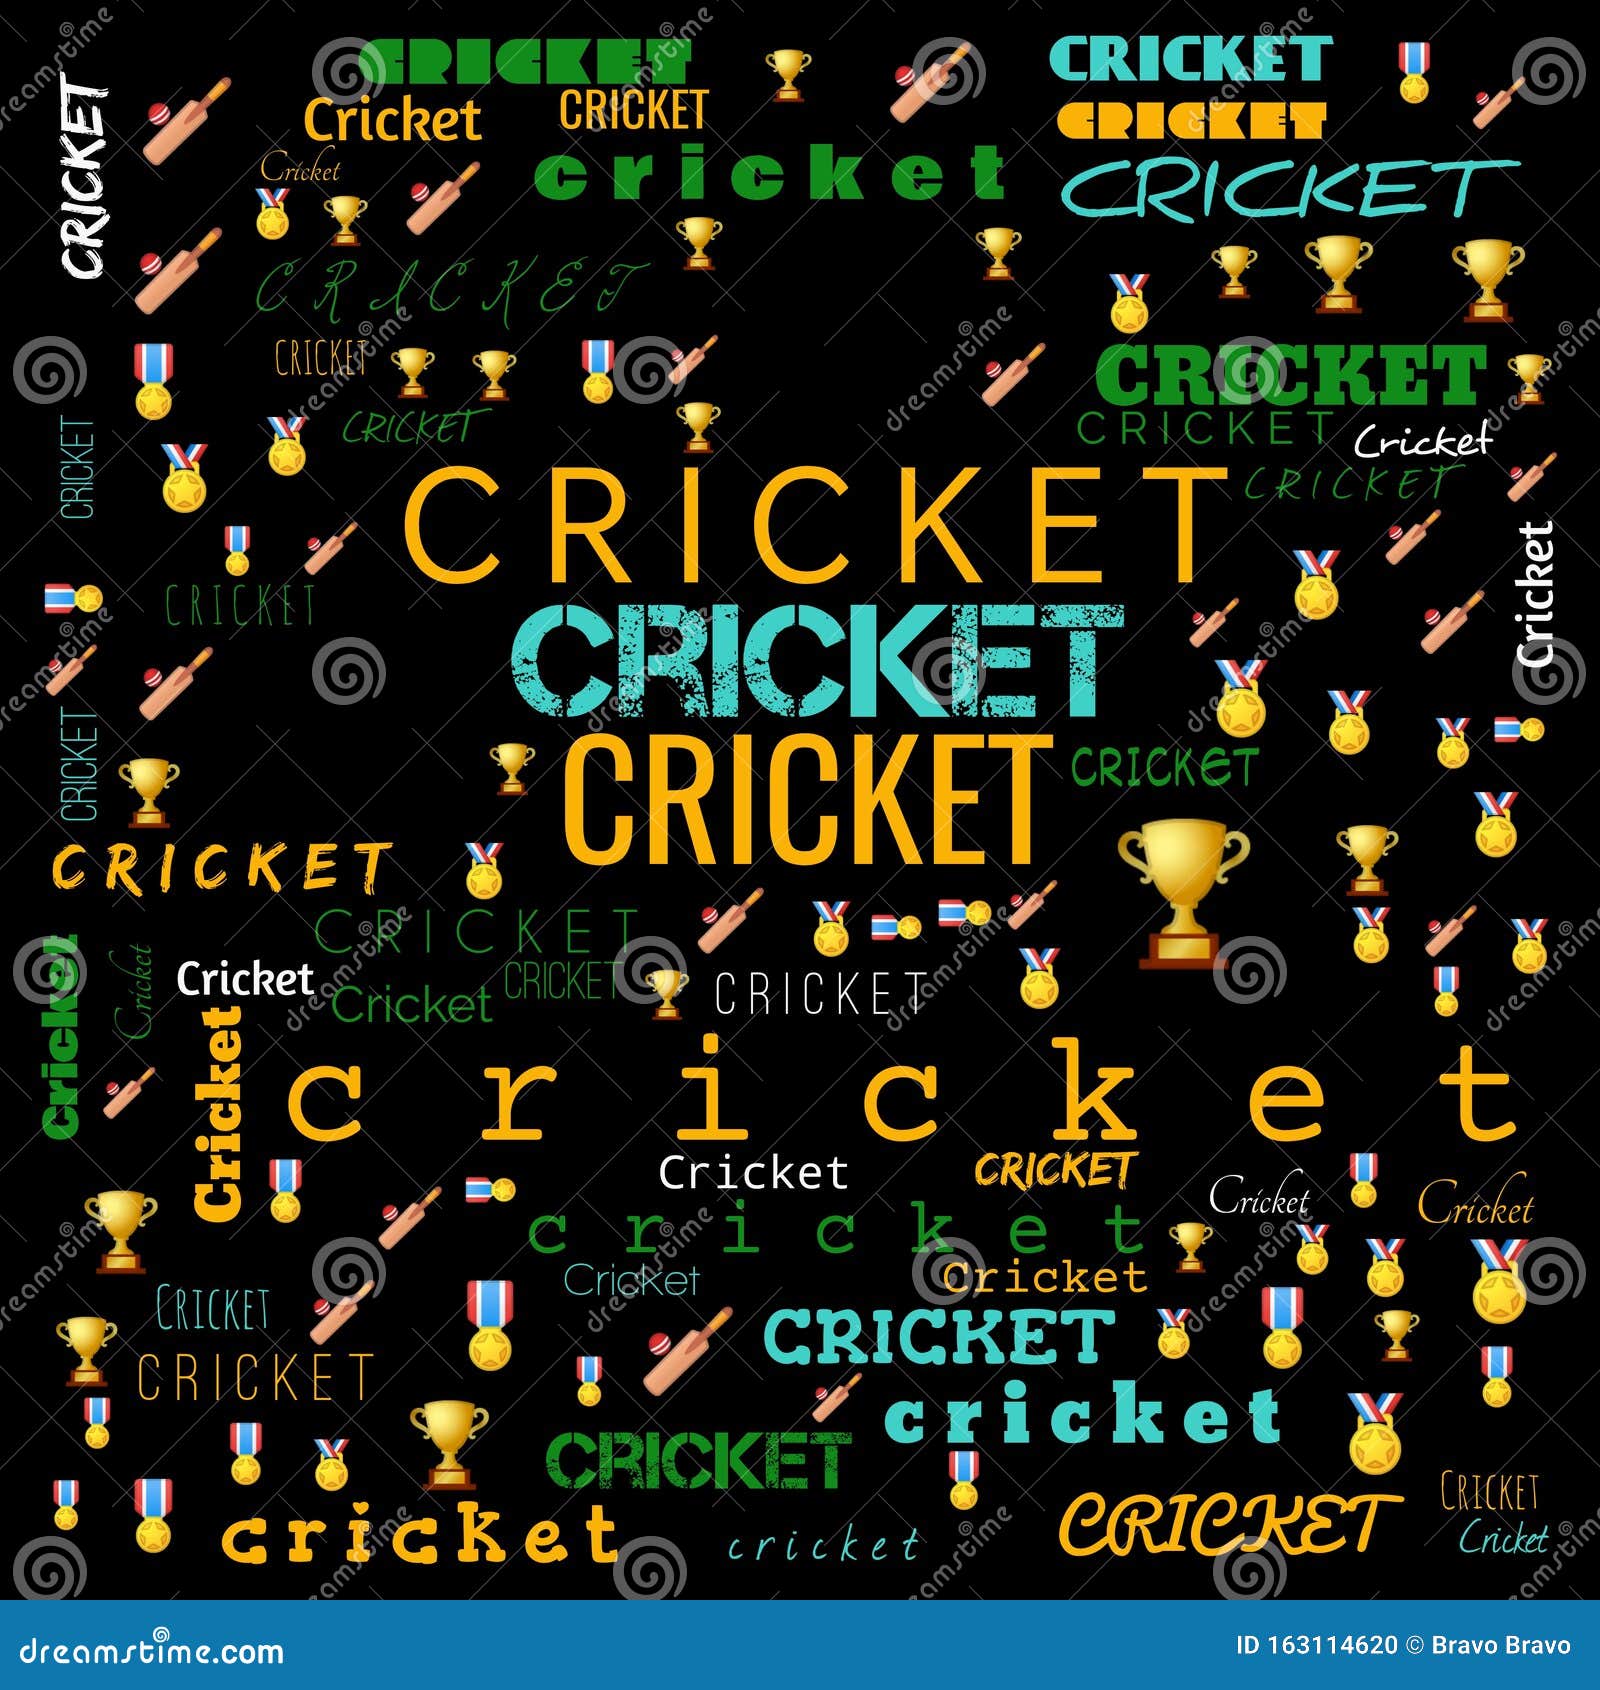 Cricket Word Cloud Use for Banner, Painting, Motivation, Web-page, Website Background, T-shirt and Shirt Printing, Poster, Gritting Stock Illustration